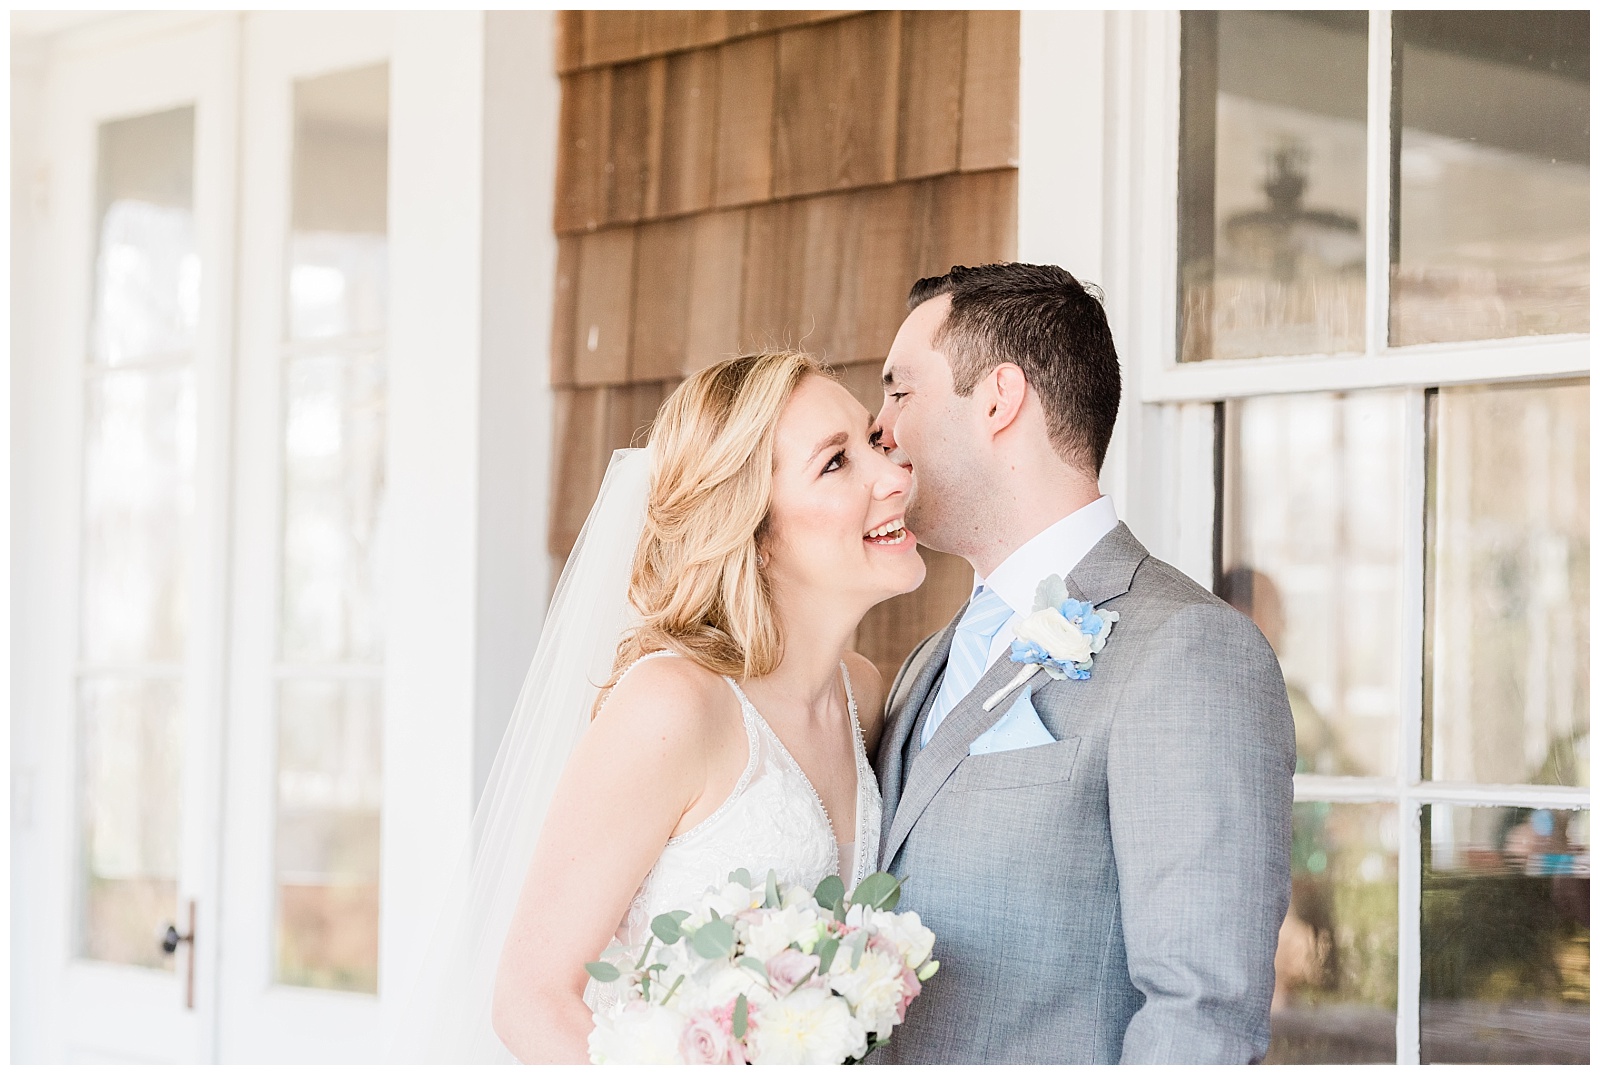 Bride laughs while groom whispers in her ear.